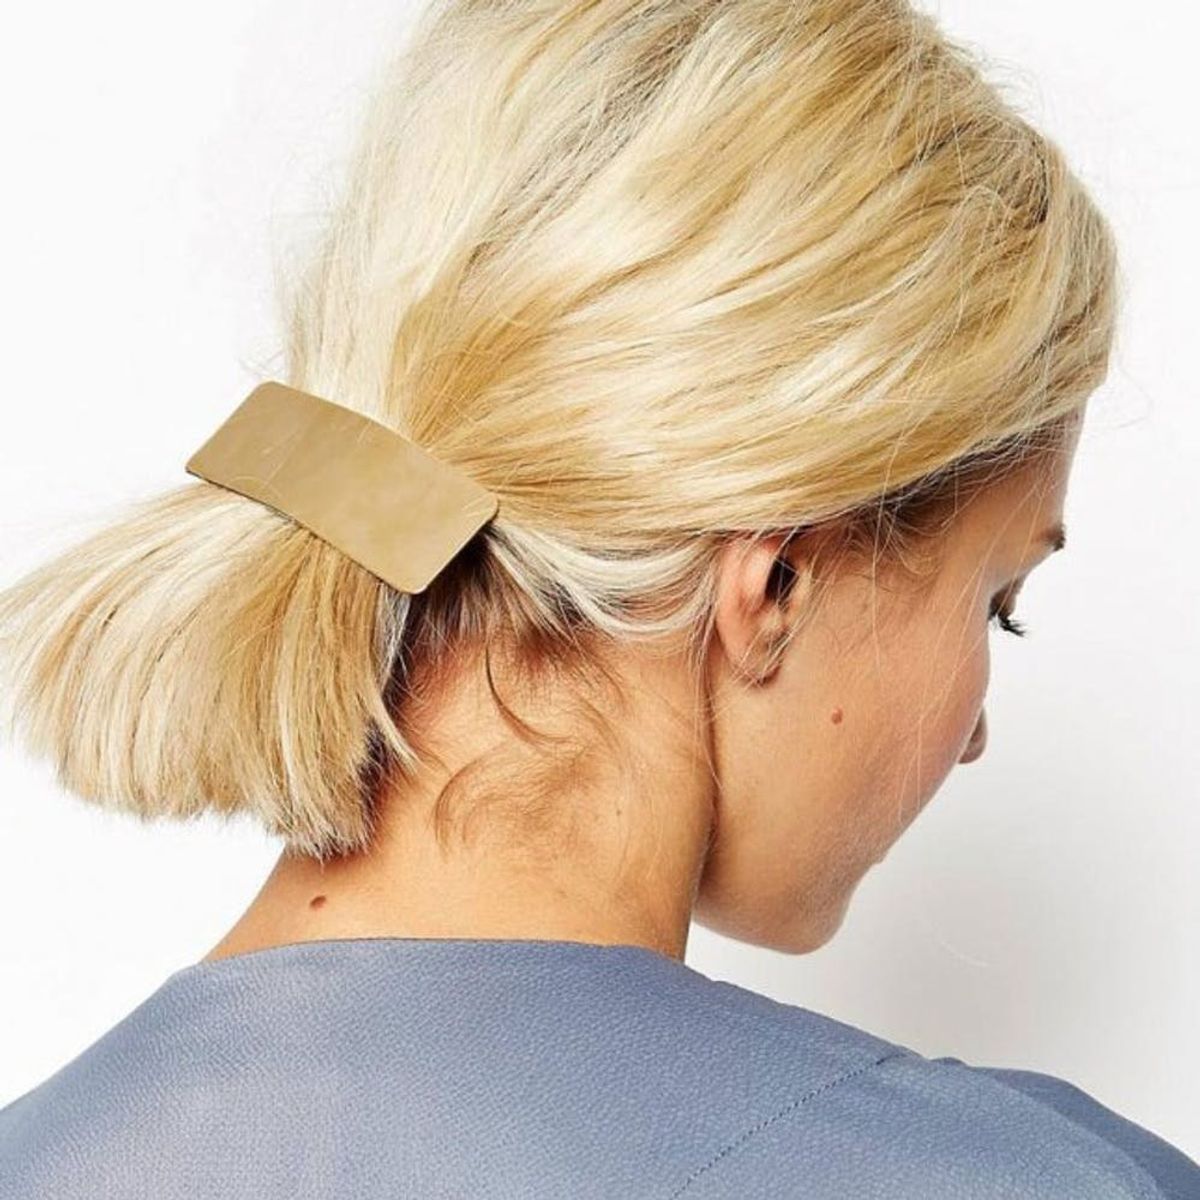 This Hair Accessory Will Transform Your Office ‘Do for 2015